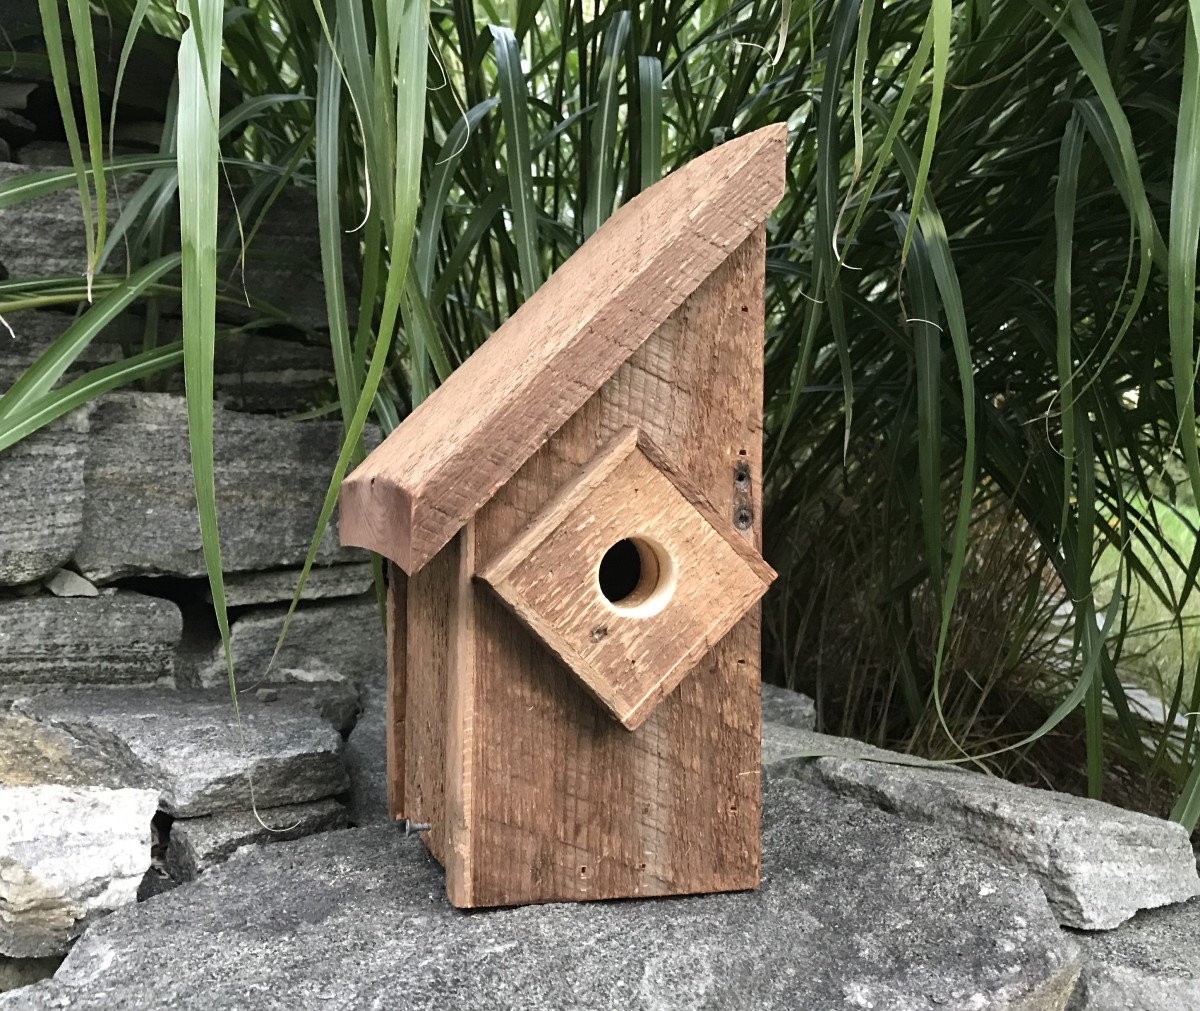 Barnwood Birdhouse Plans: How to Build a Rustic Handcrafted Birdhouse 